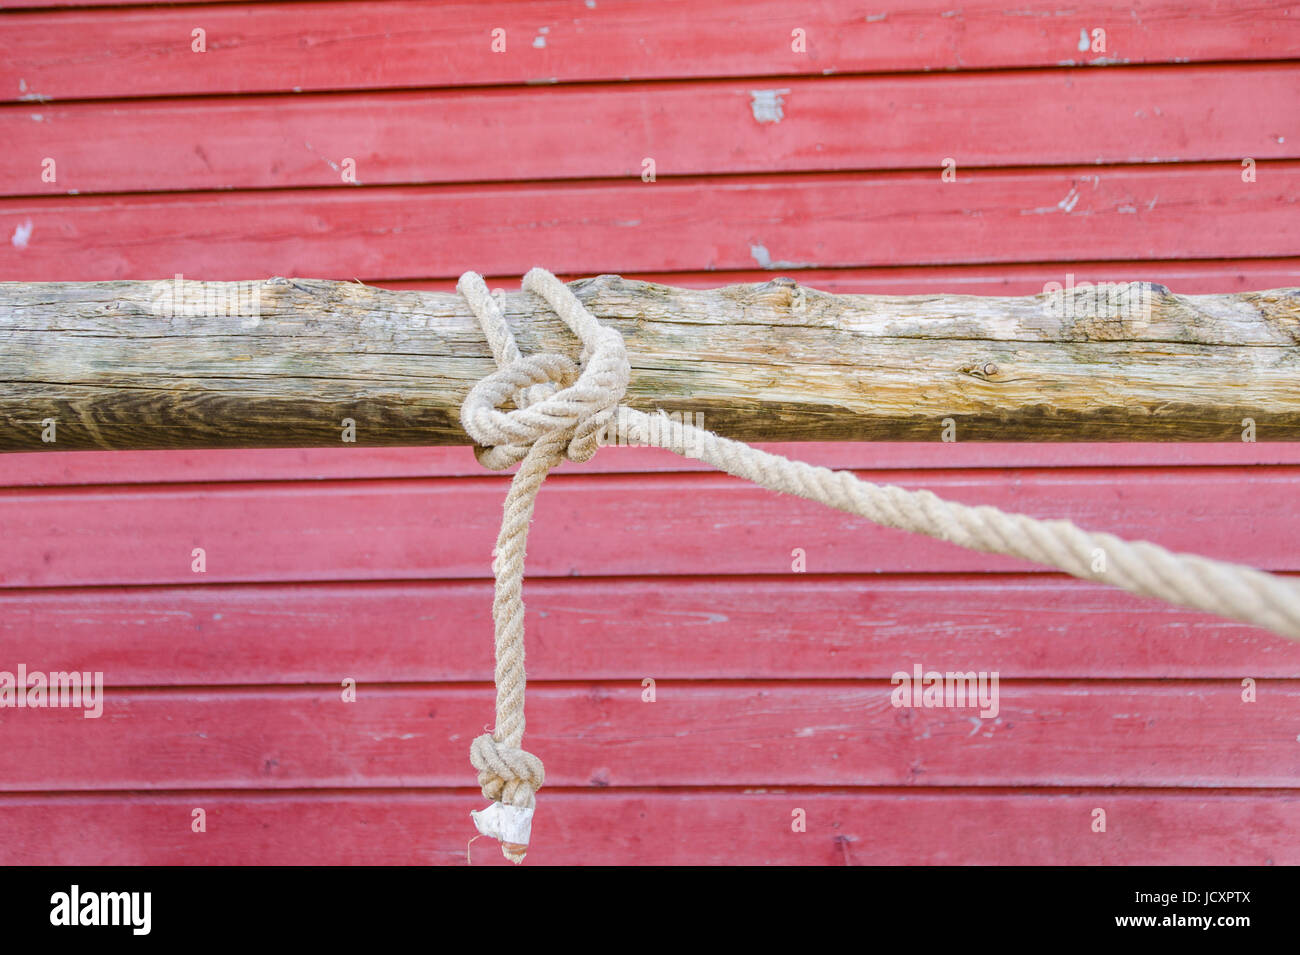 Rope tied in a knot on a hitching post in front of a rustic red barn wall Stock Photo